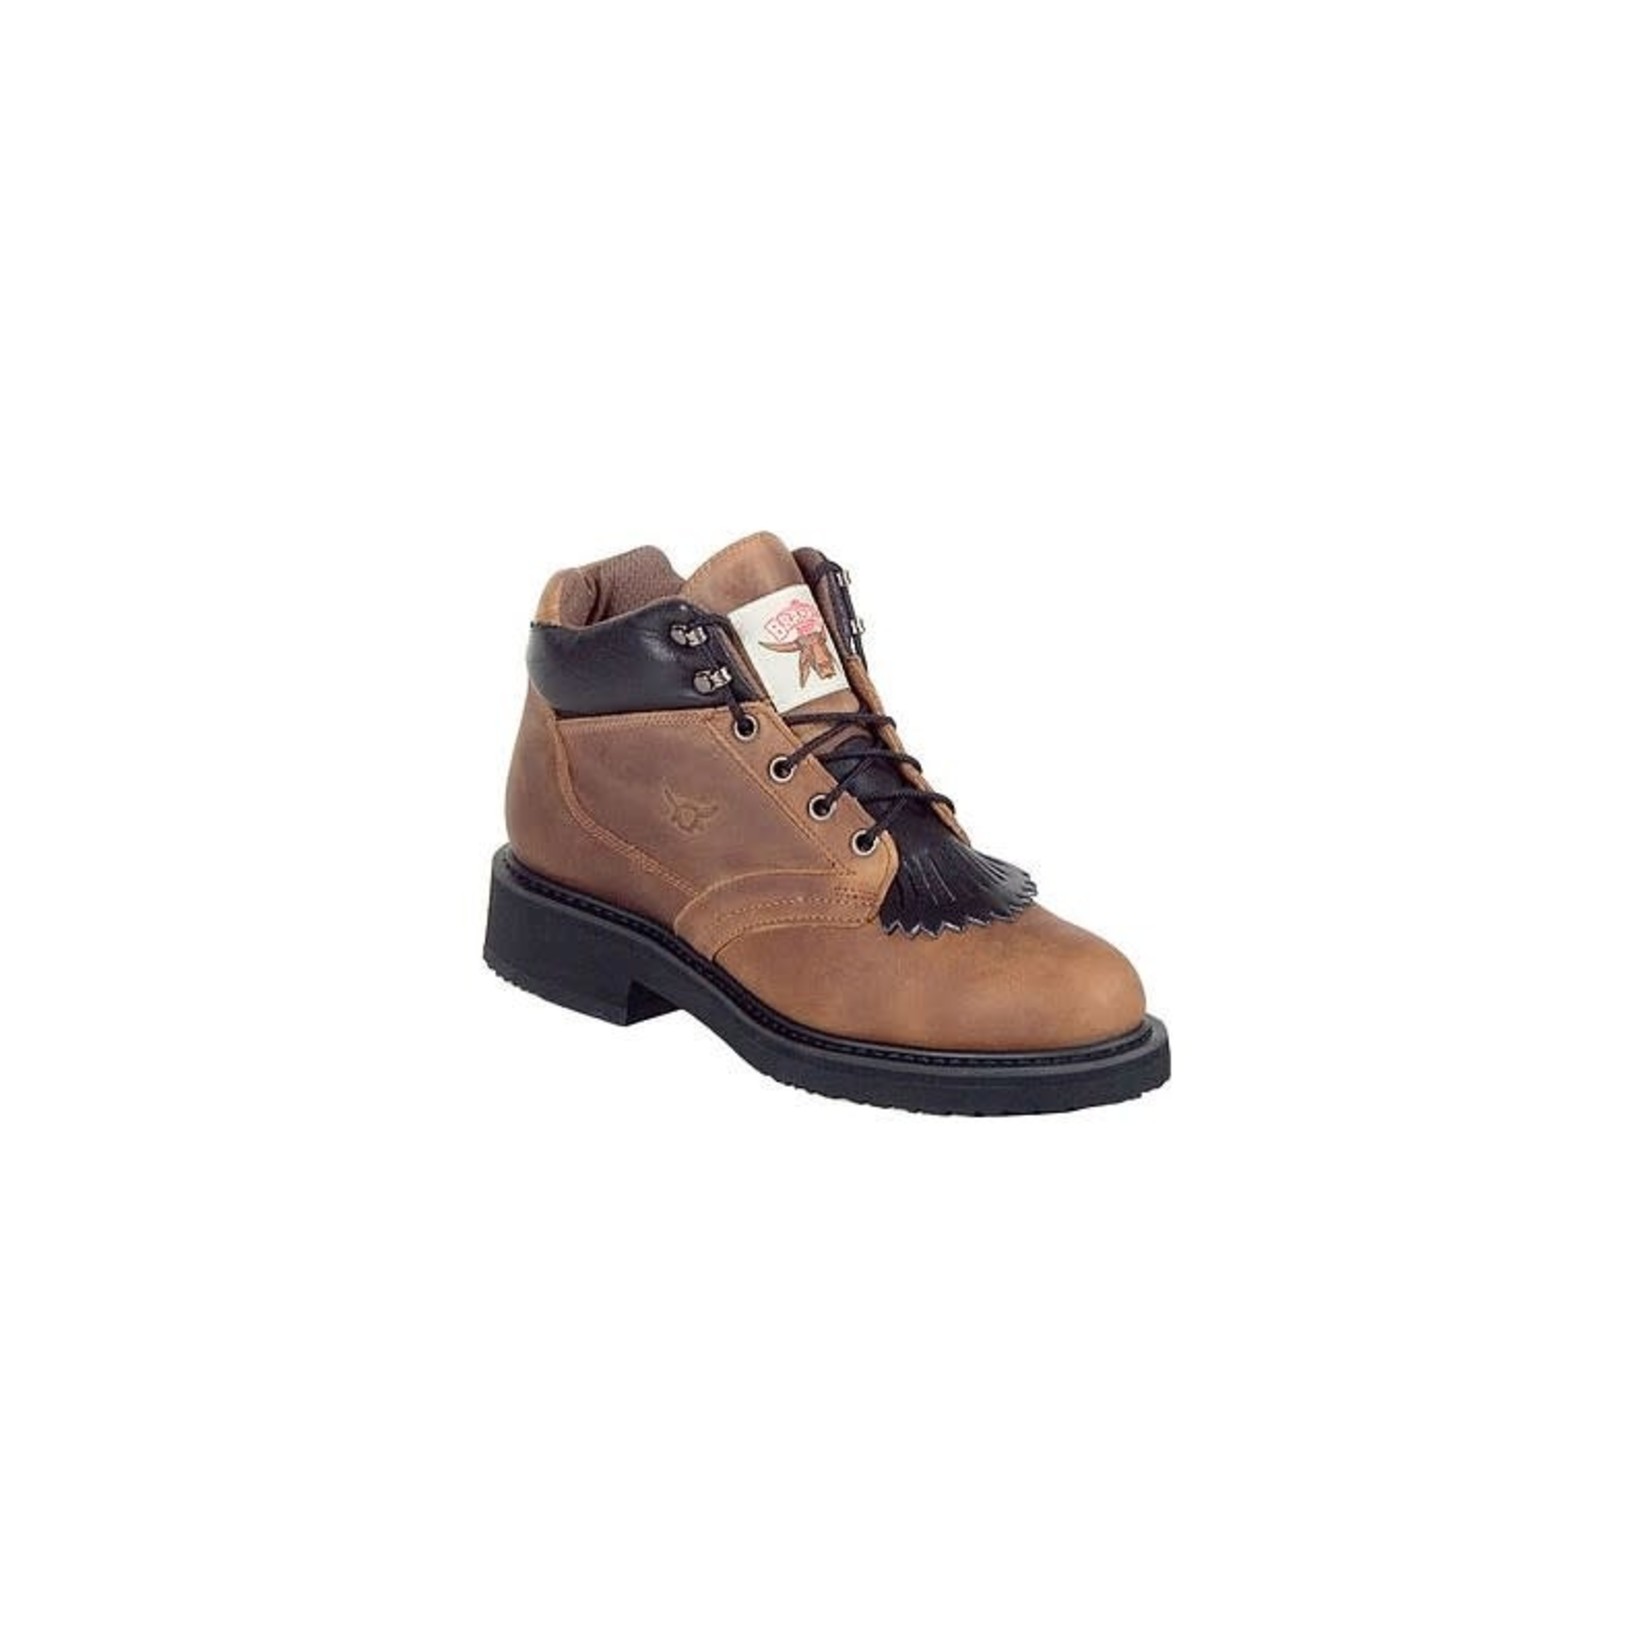 Canada West Boots Ladies Barnie Copper Crazy Horse